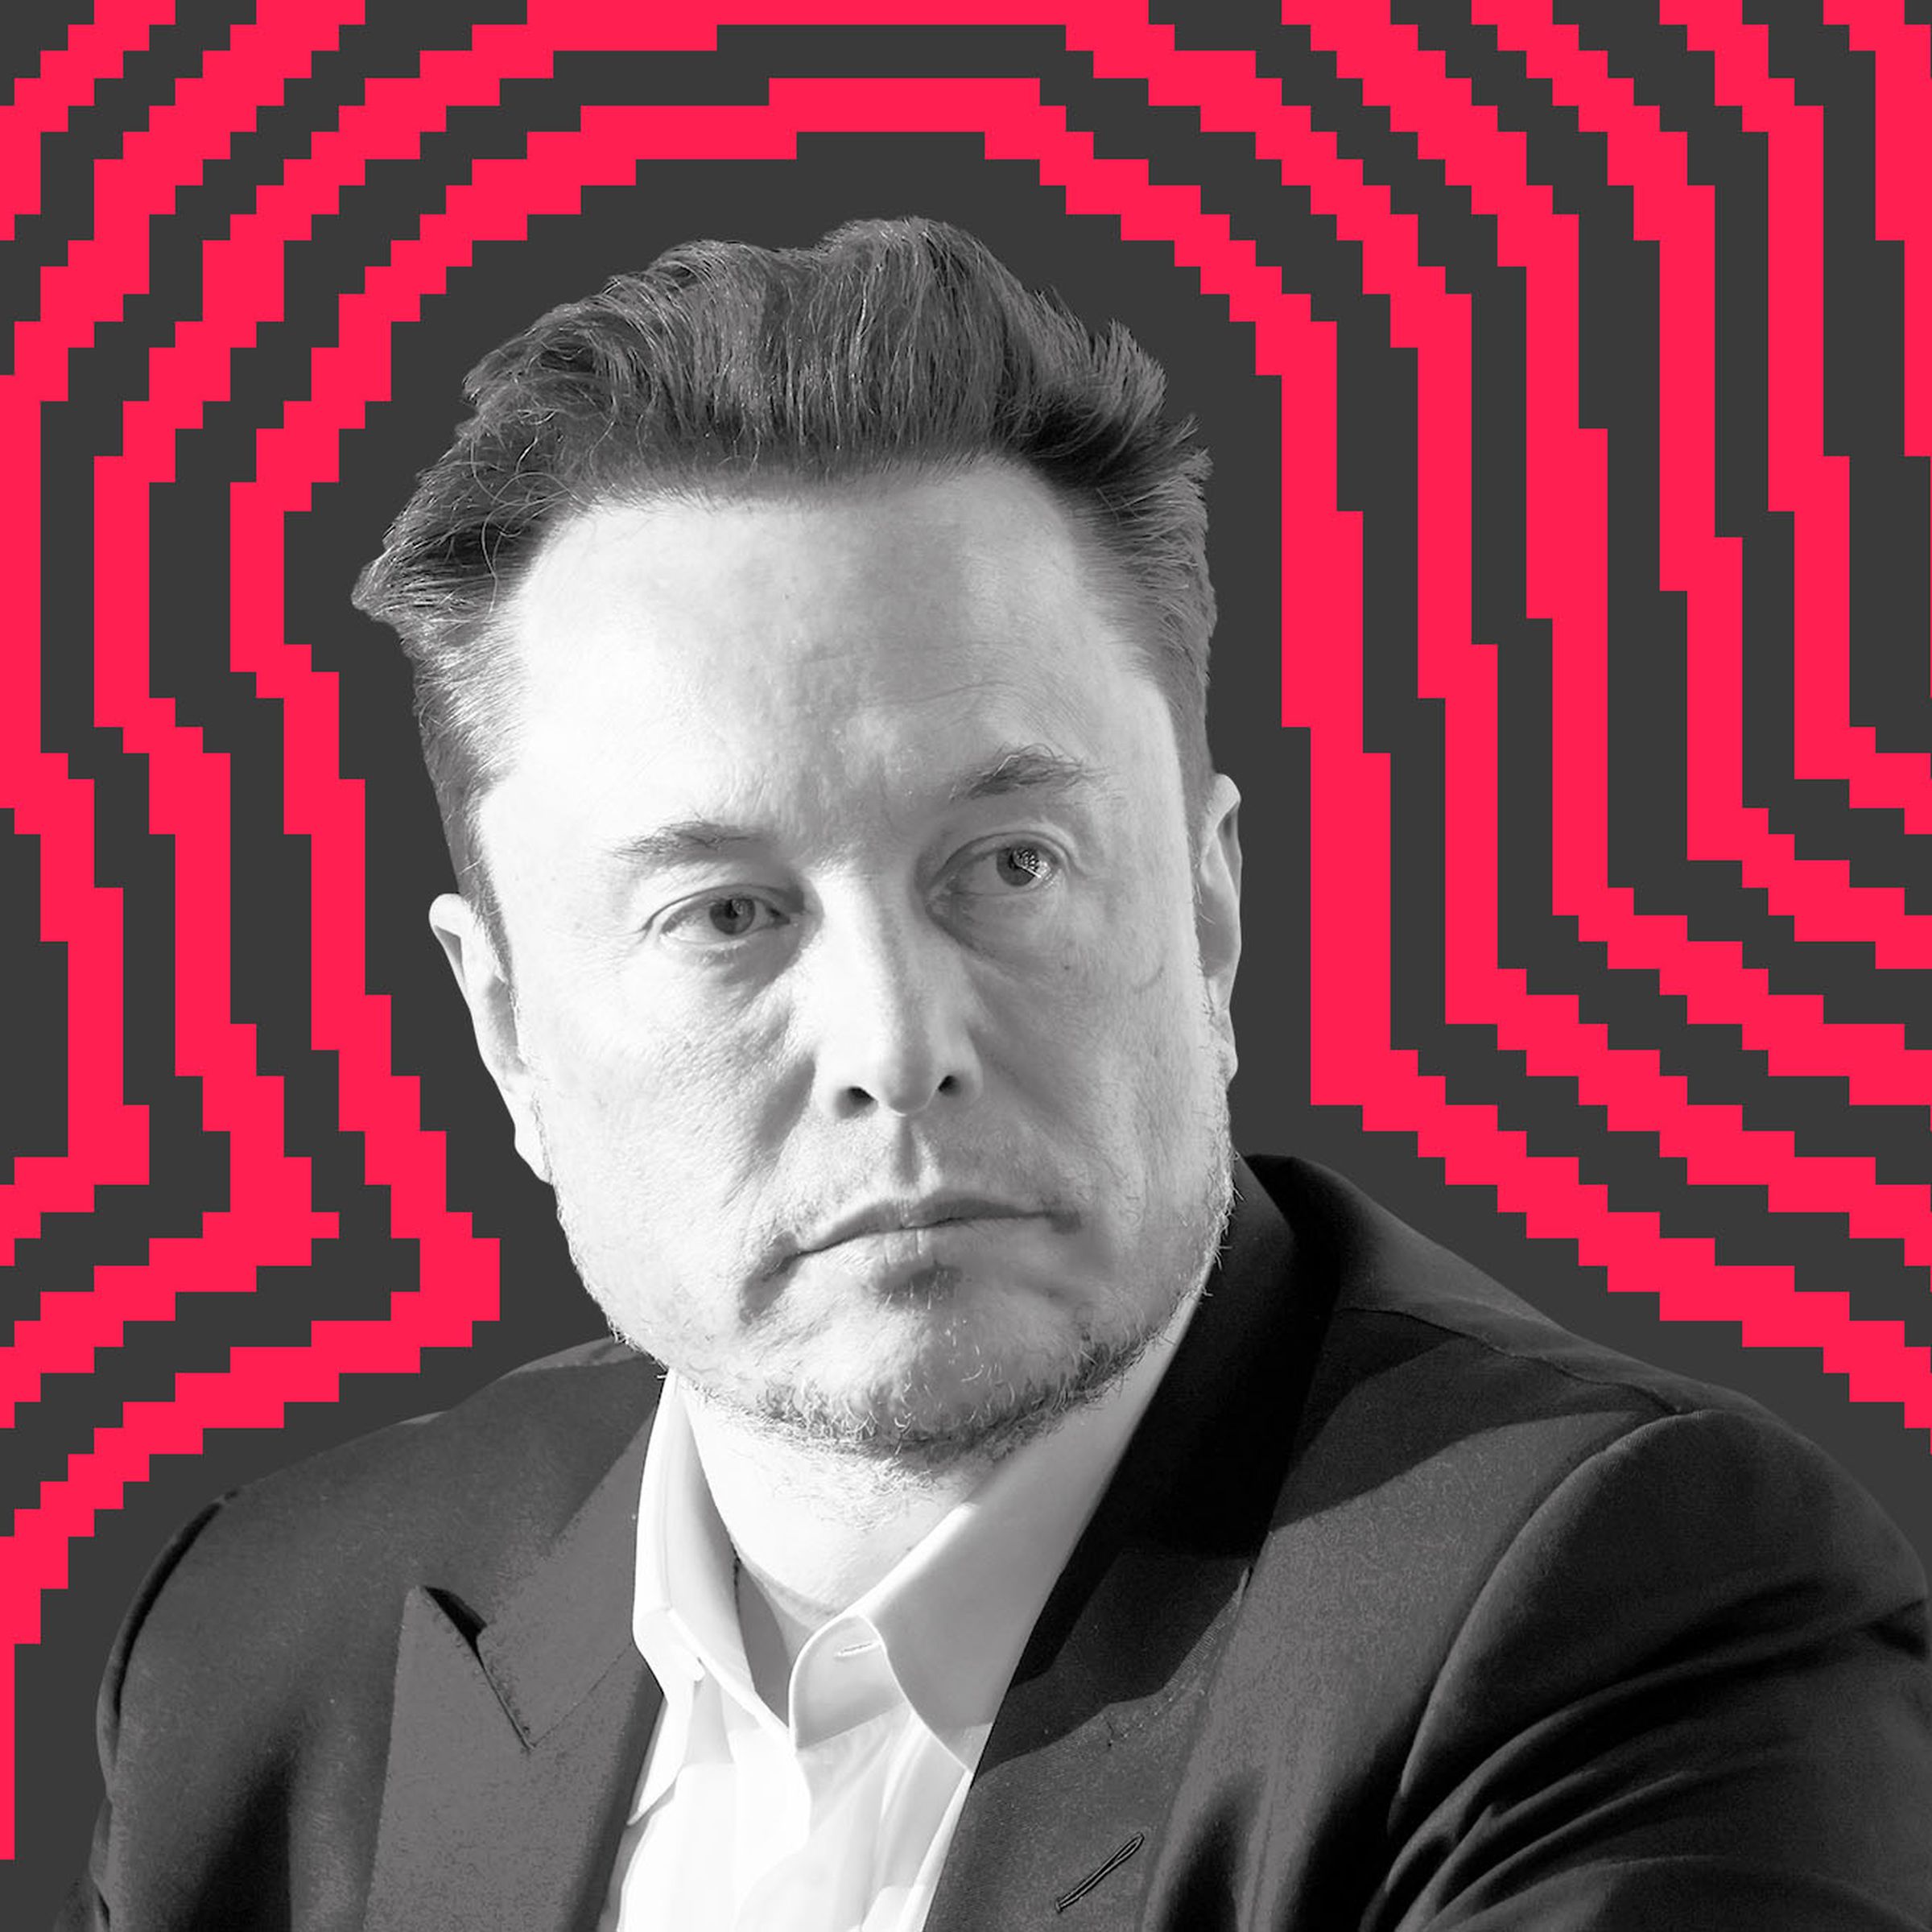 Photo collage of Elon Musk.